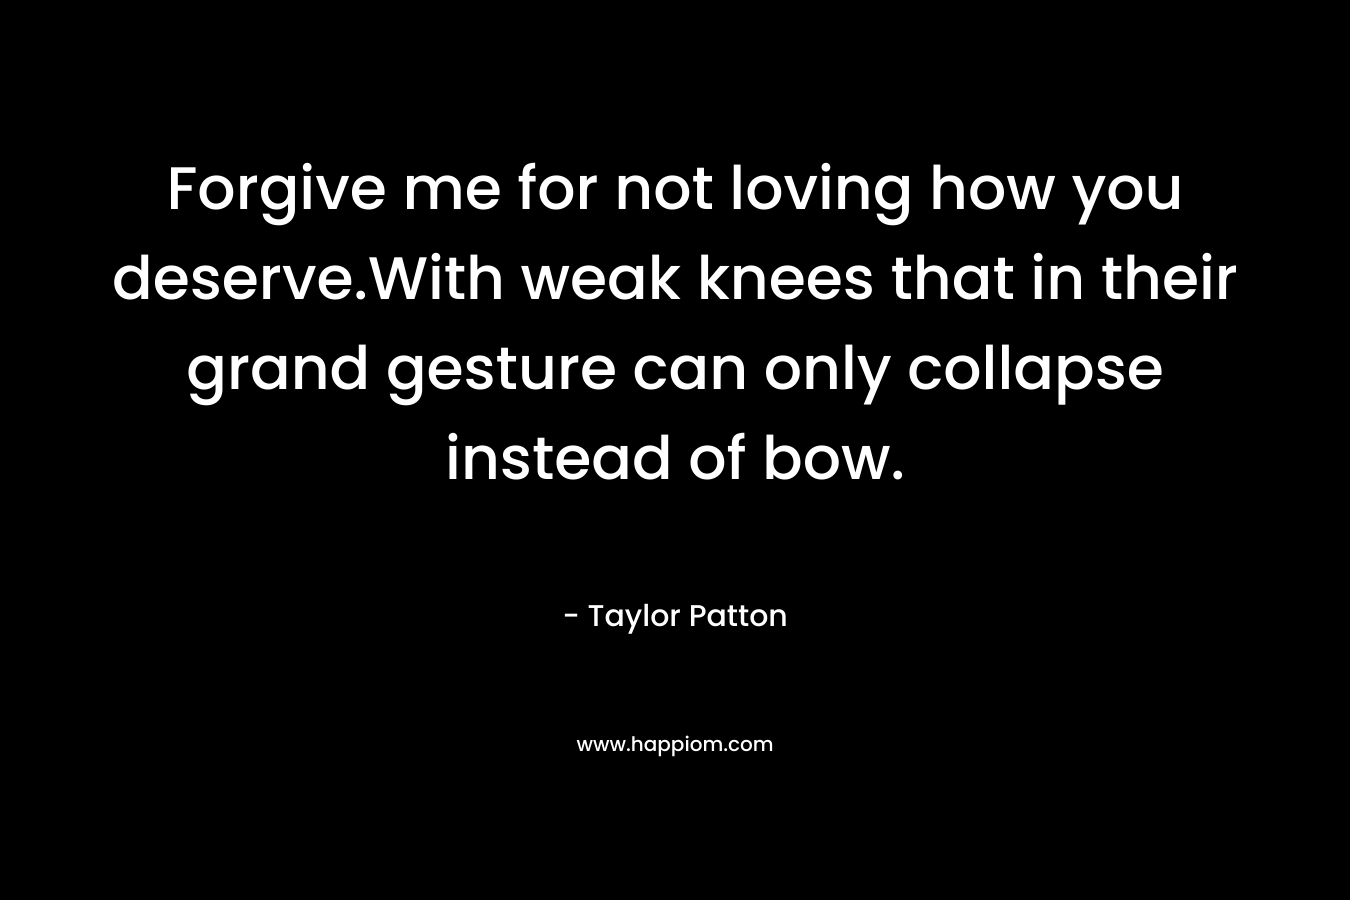 Forgive me for not loving how you deserve.With weak knees that in their grand gesture can only collapse instead of bow.